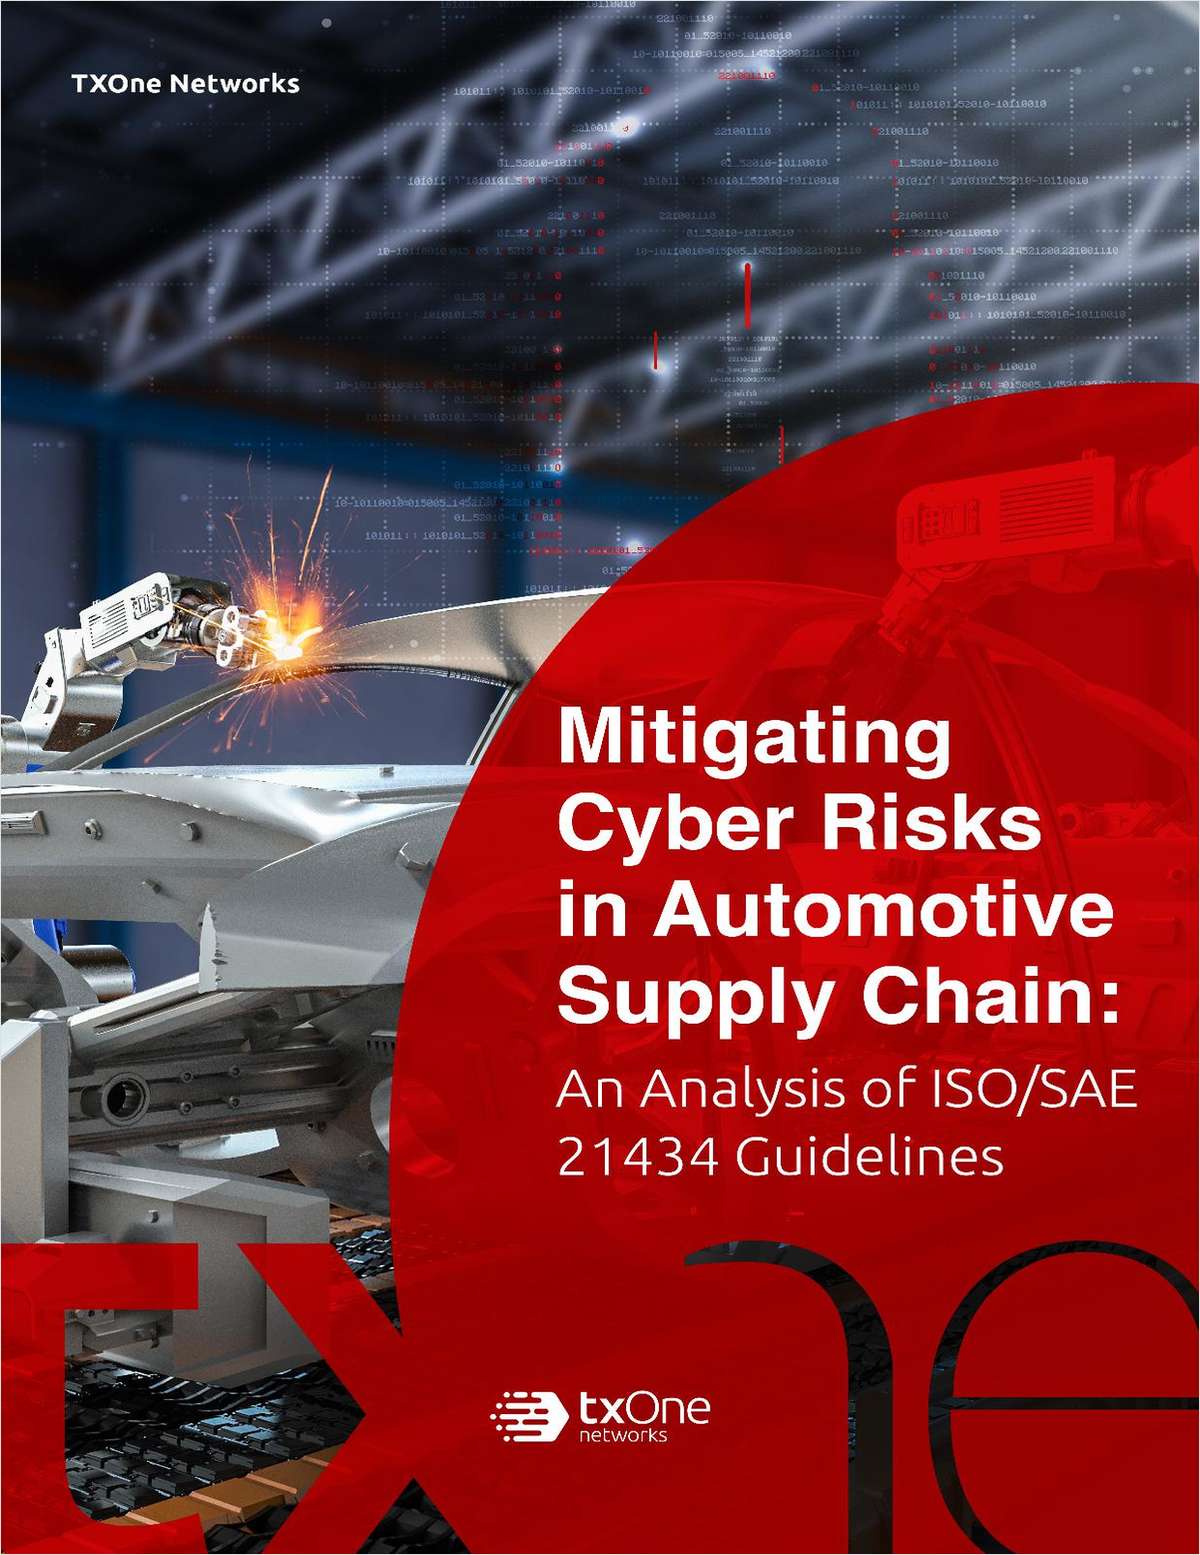 Mitigating Cyber Risks in Automotive Supply Chain